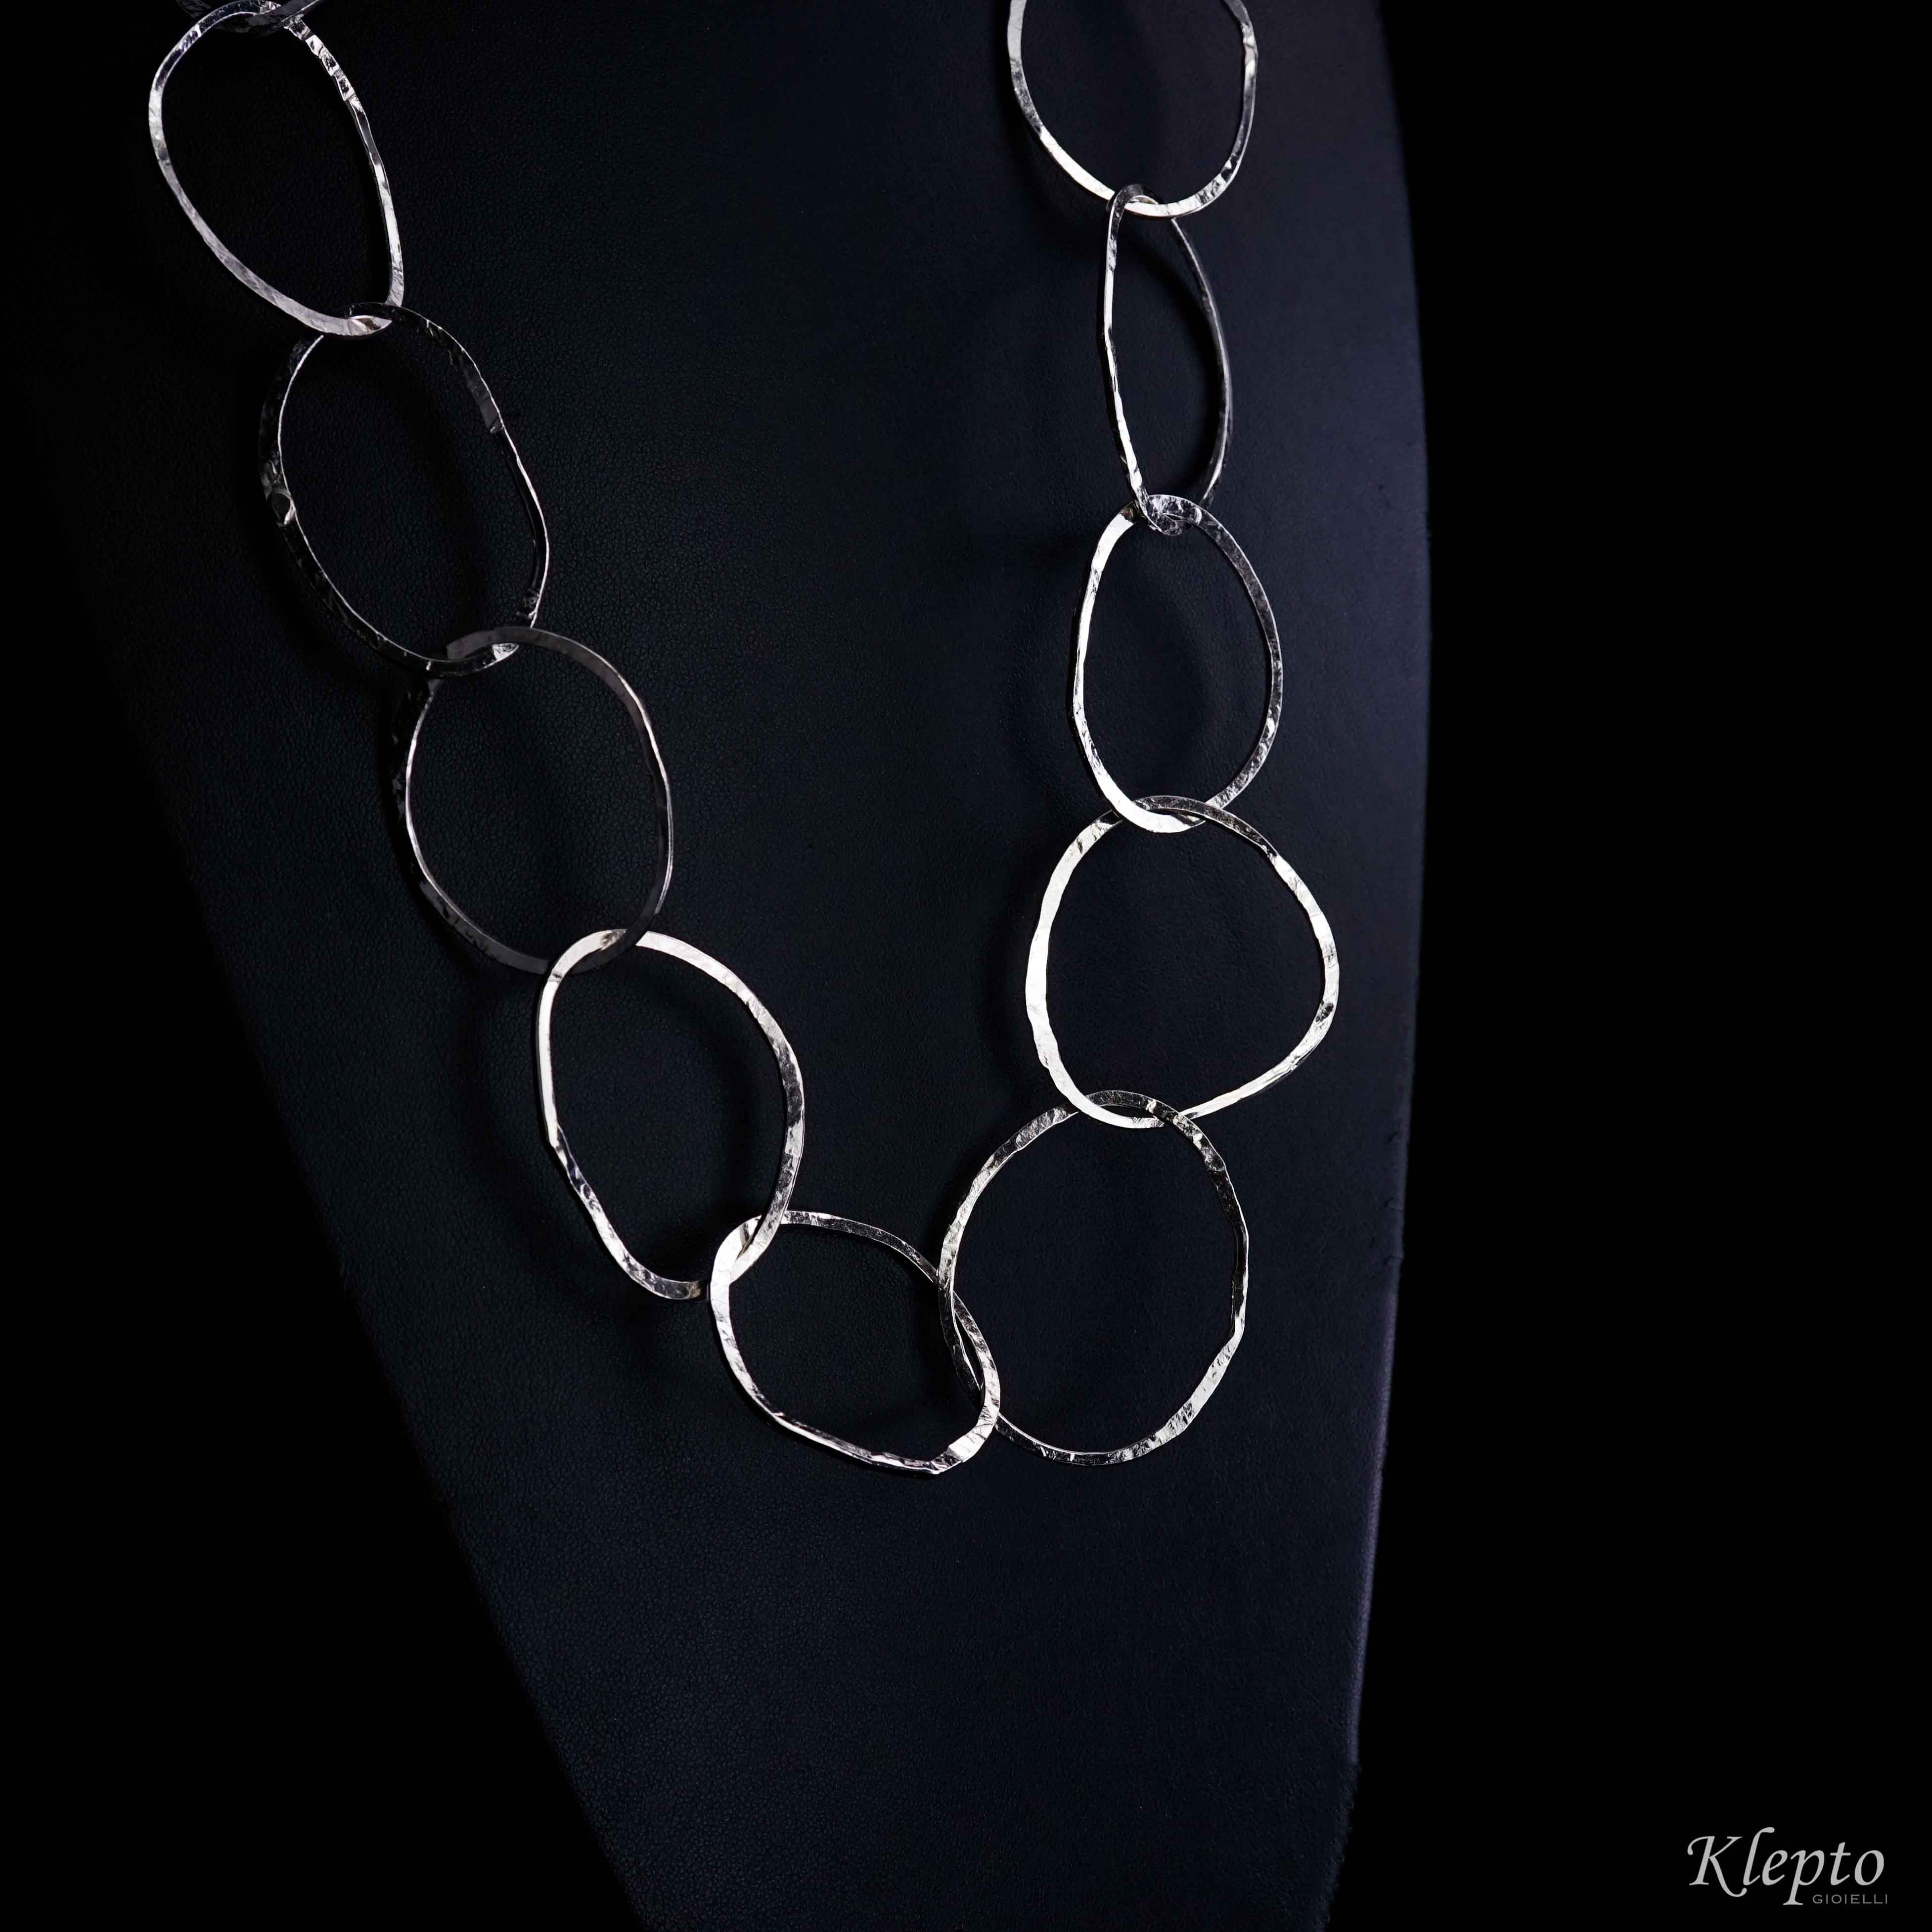 Necklace in Silnova® Silver with hand hammered rings